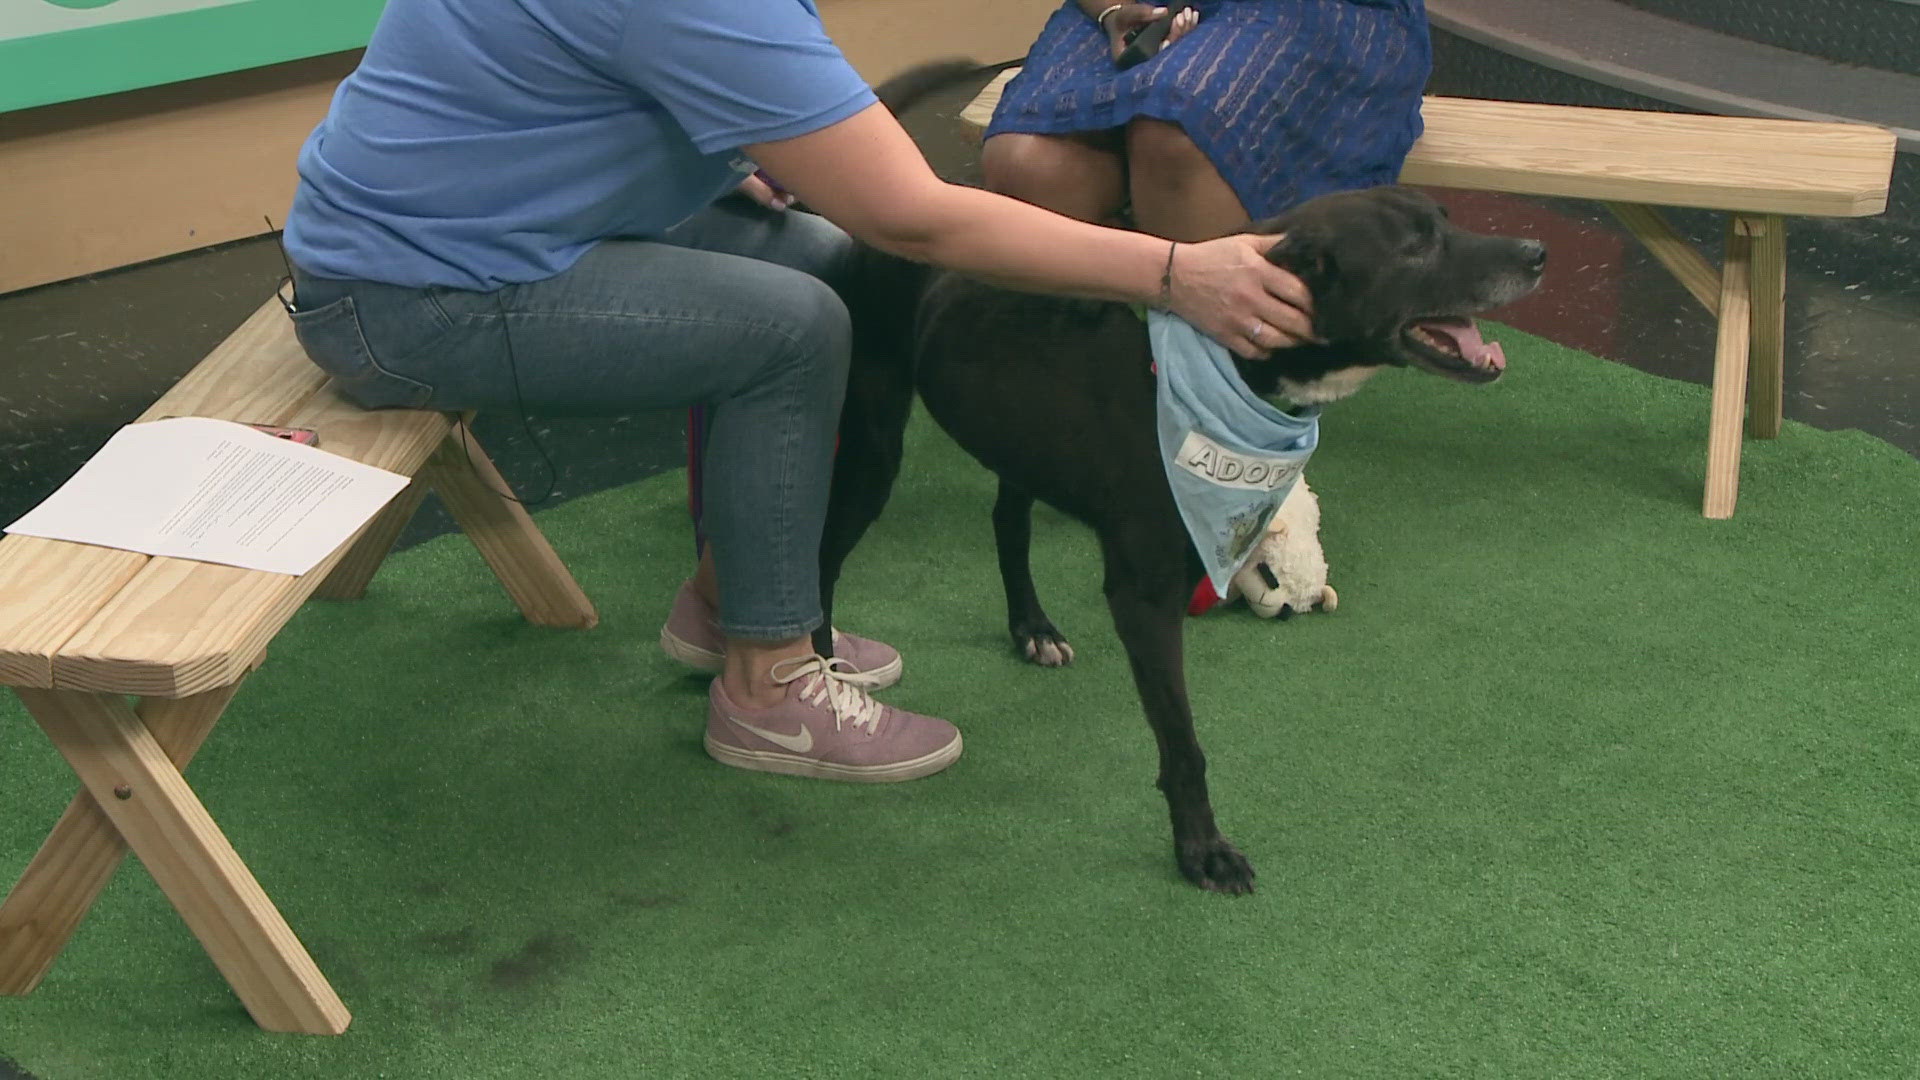 Meet Bentley! Our Pet of the Week is up for adoption at Lake Erie Labrador Retriever Rescue